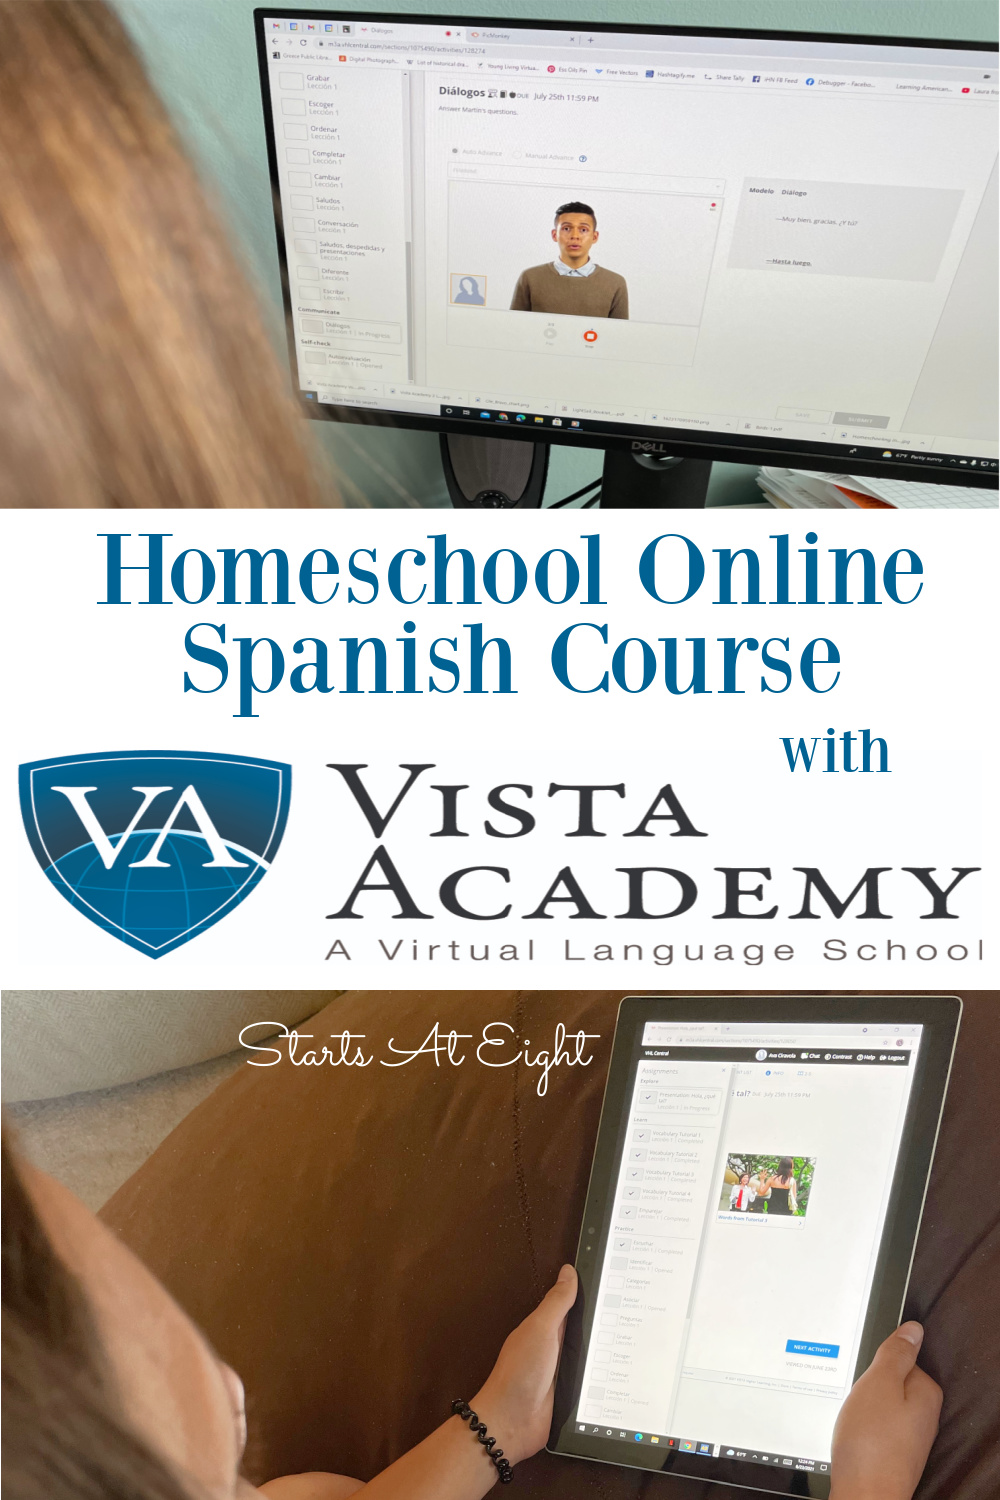 Homeschool Online Spanish Course with Vista Academy introduces vocabulary and grammar while simultaneously developing a students listening, reading, writing, and speaking skills. A review from Starts At Eight.